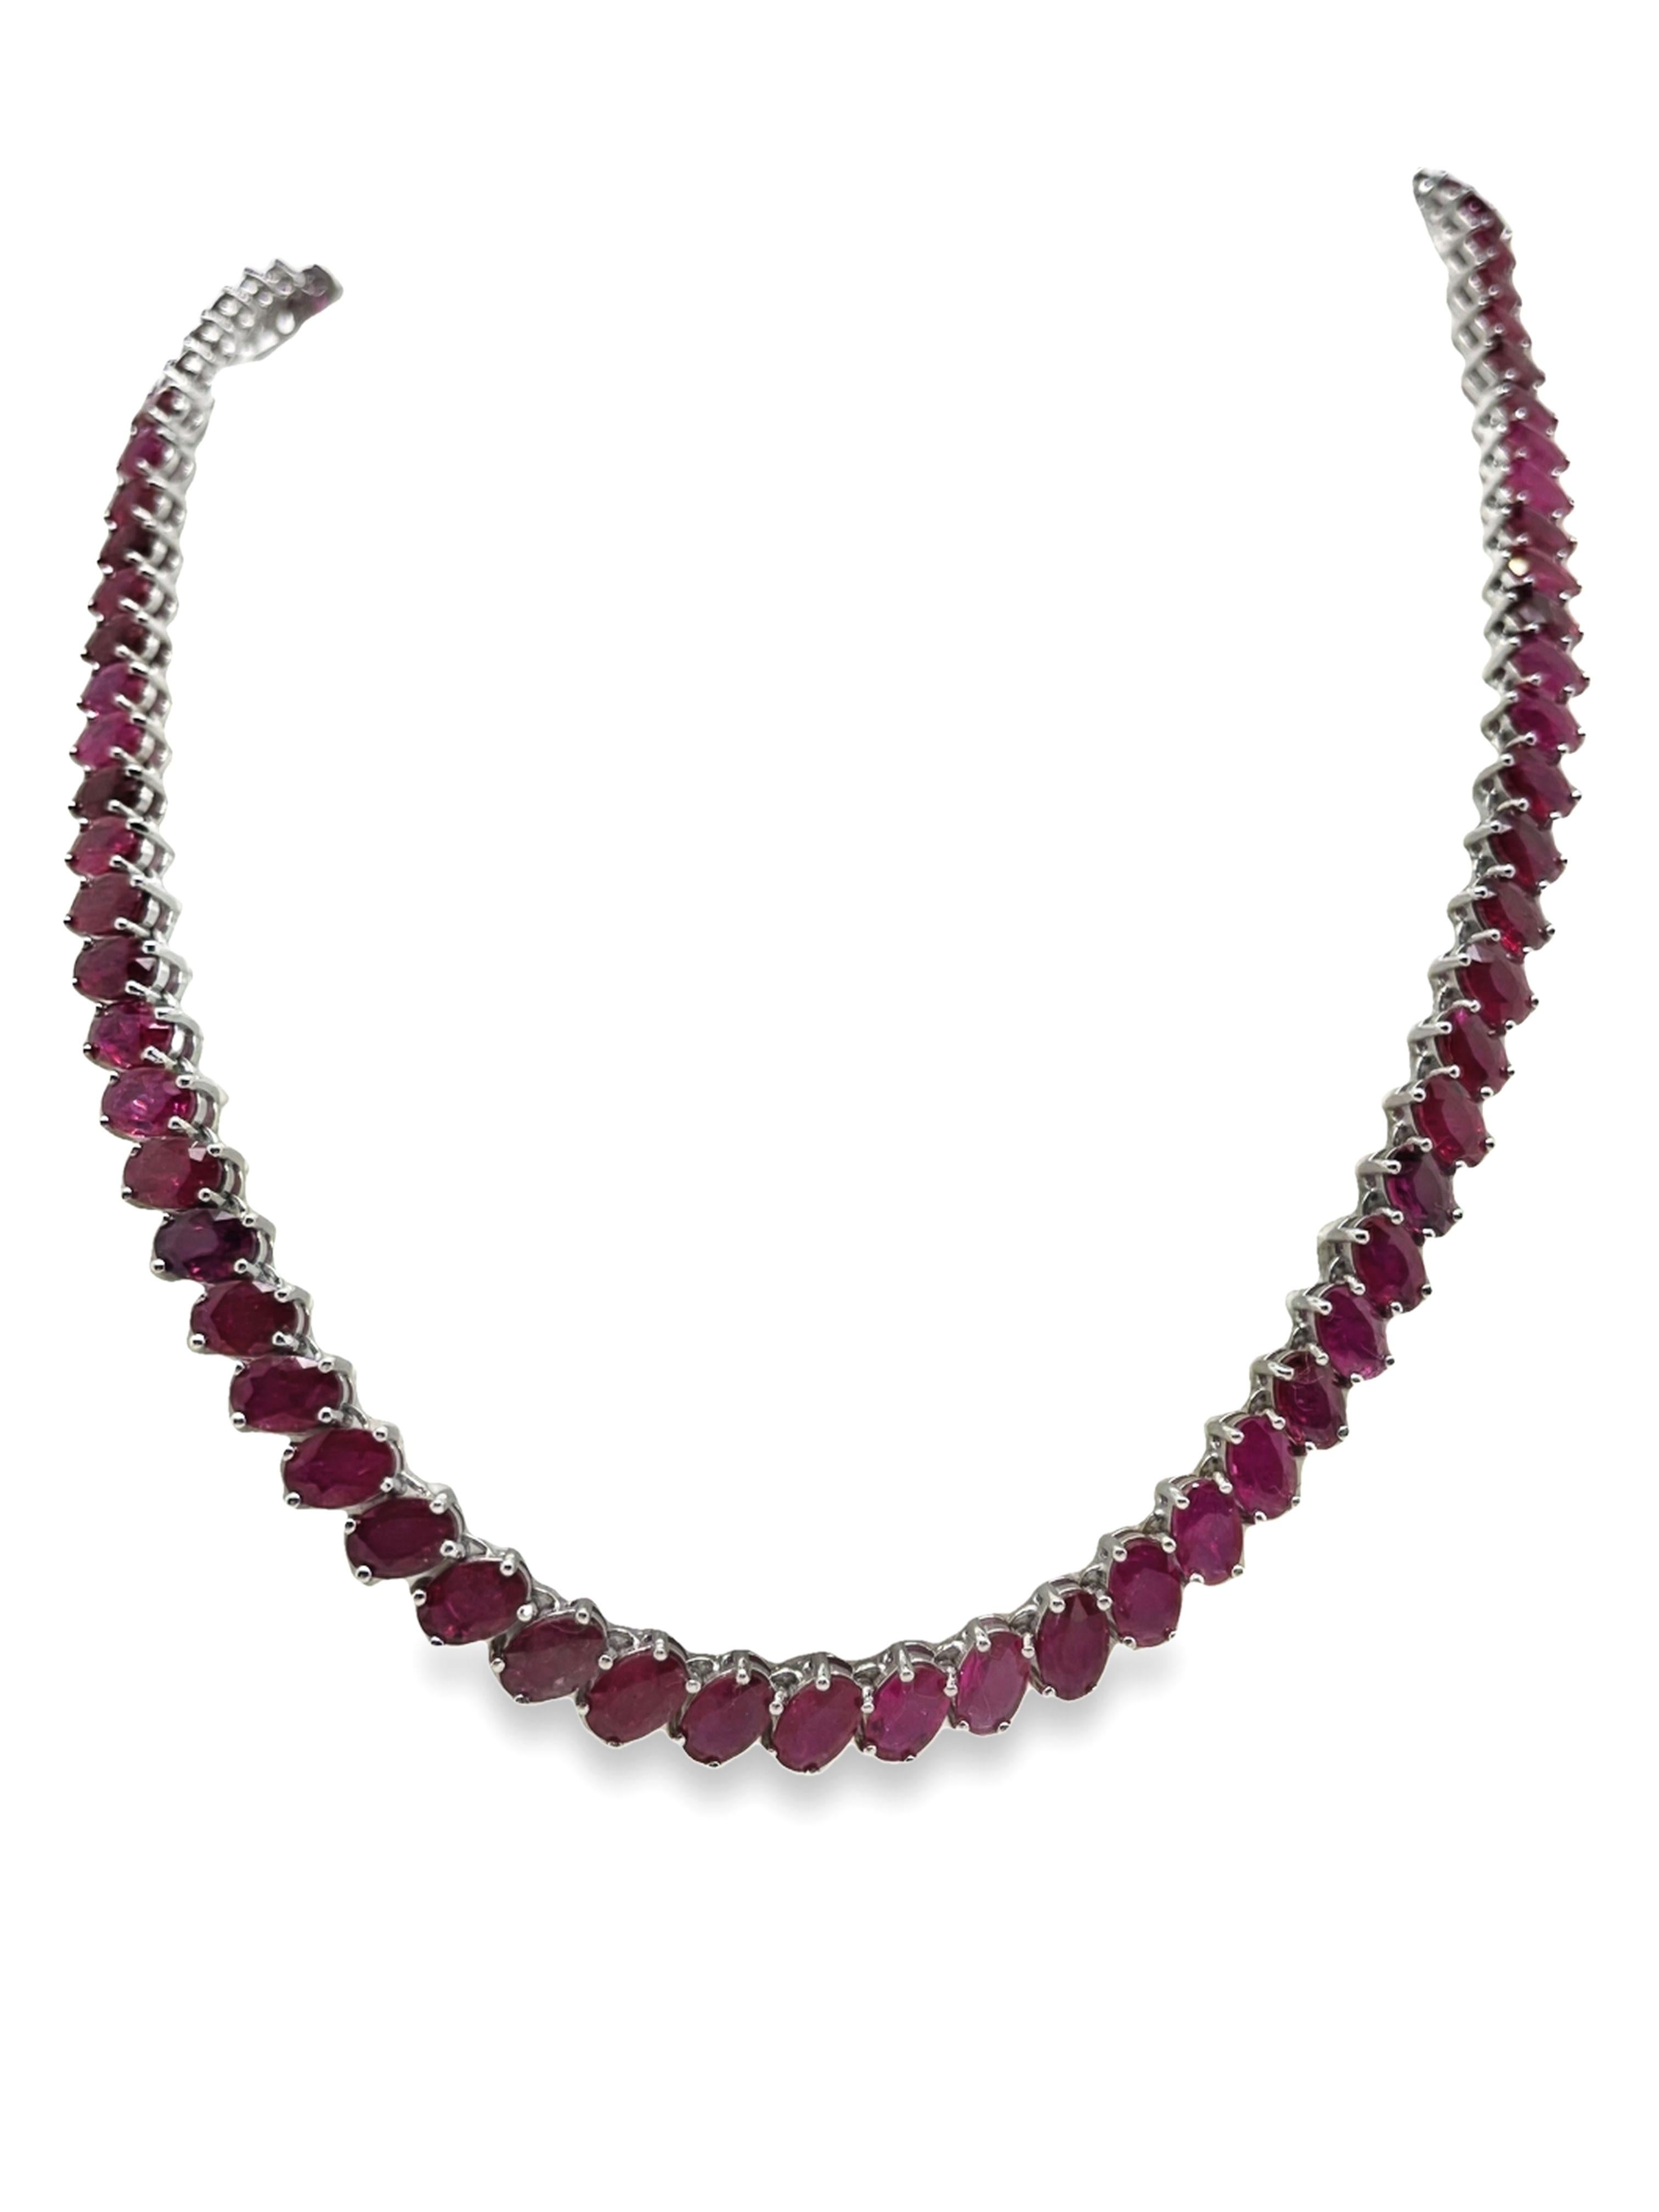 Adorn your neckline with sophistication and grace with our 41.71-carats natural rubies oval mixed cut necklace, elegantly set in 14K white gold. The timeless allure of the rubies, weighing a total of 31.45 grams, is beautifully complemented by the